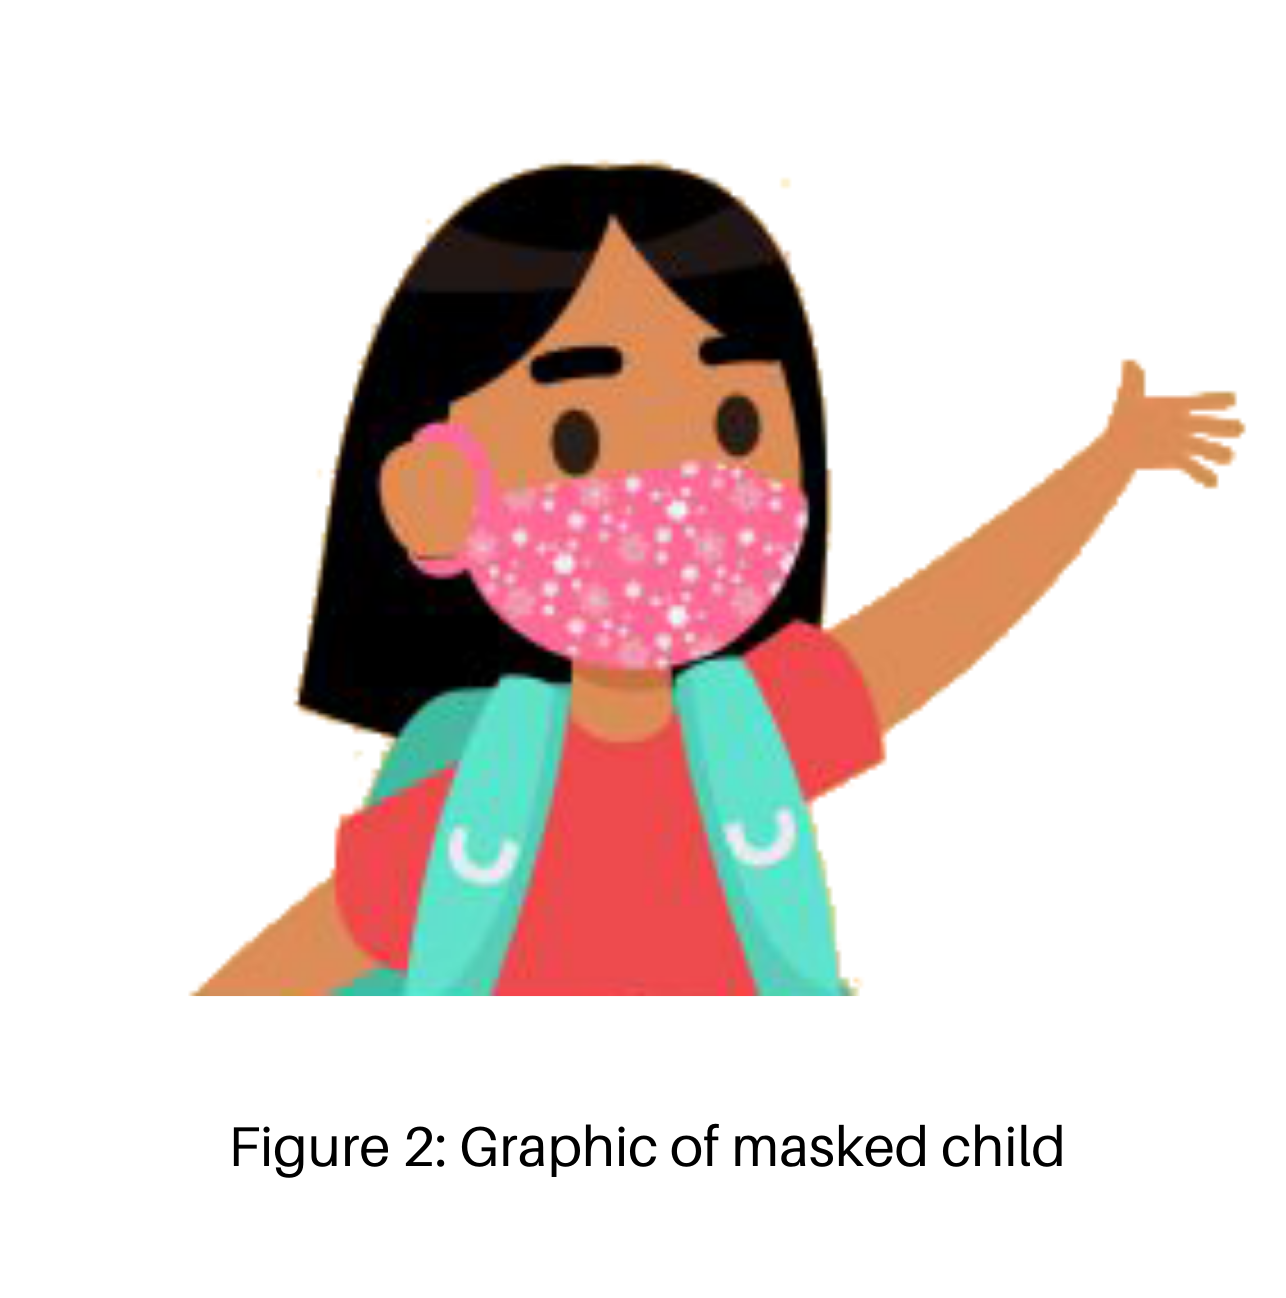 Masked child Text: Figure 2 graphic of masked child